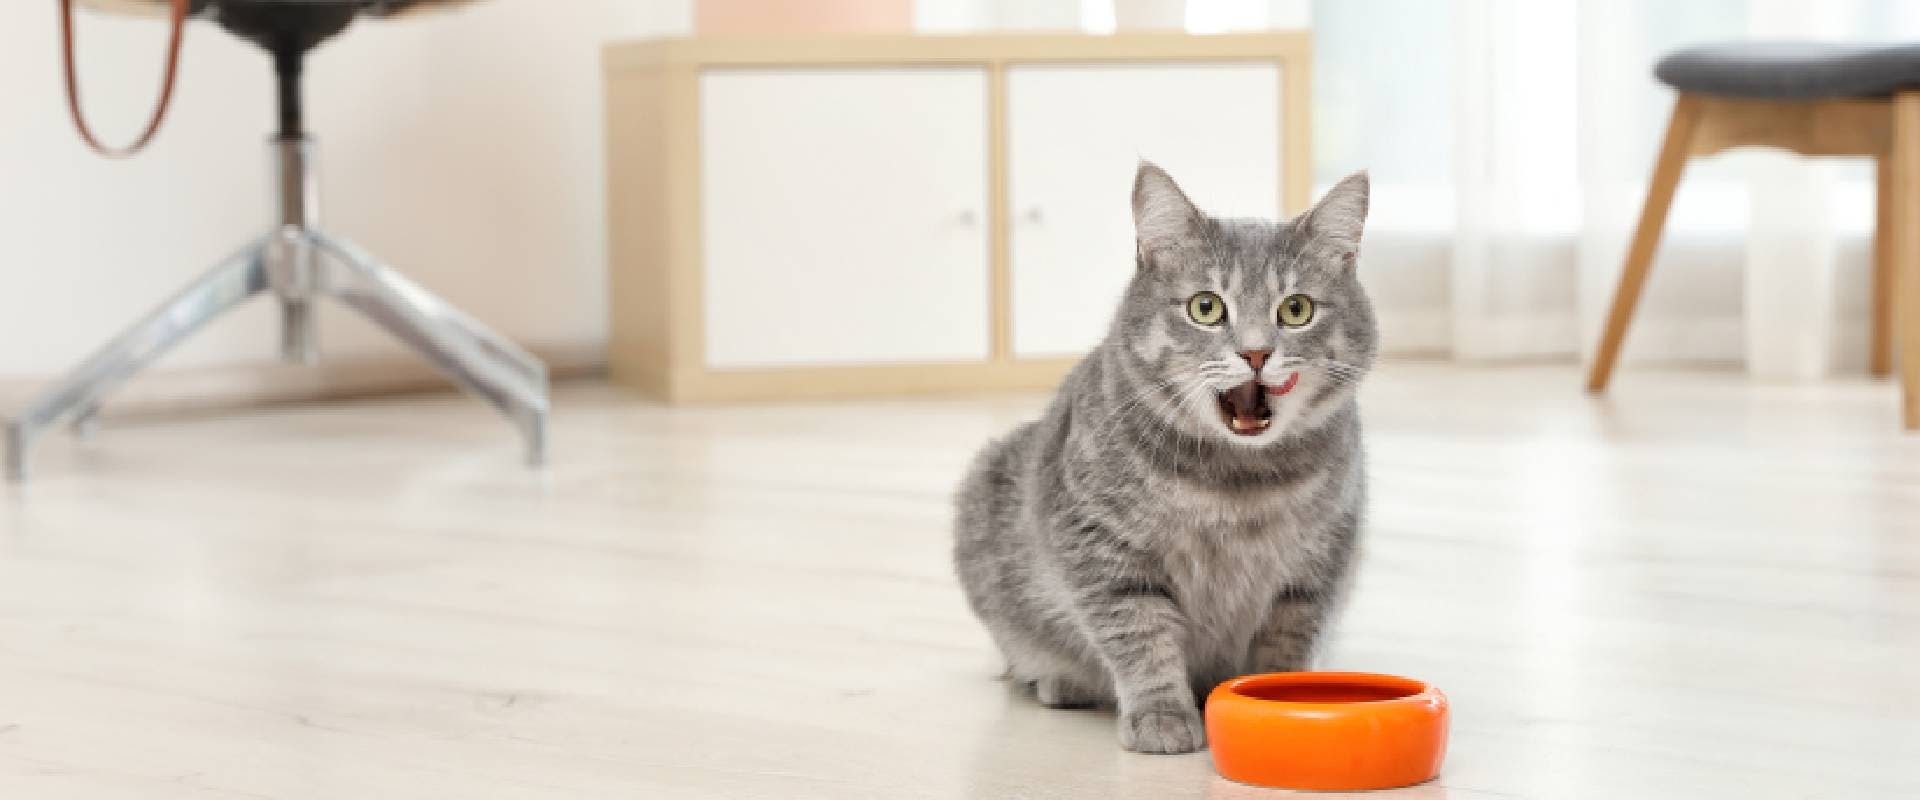 Gray cat eating from an orange bowl